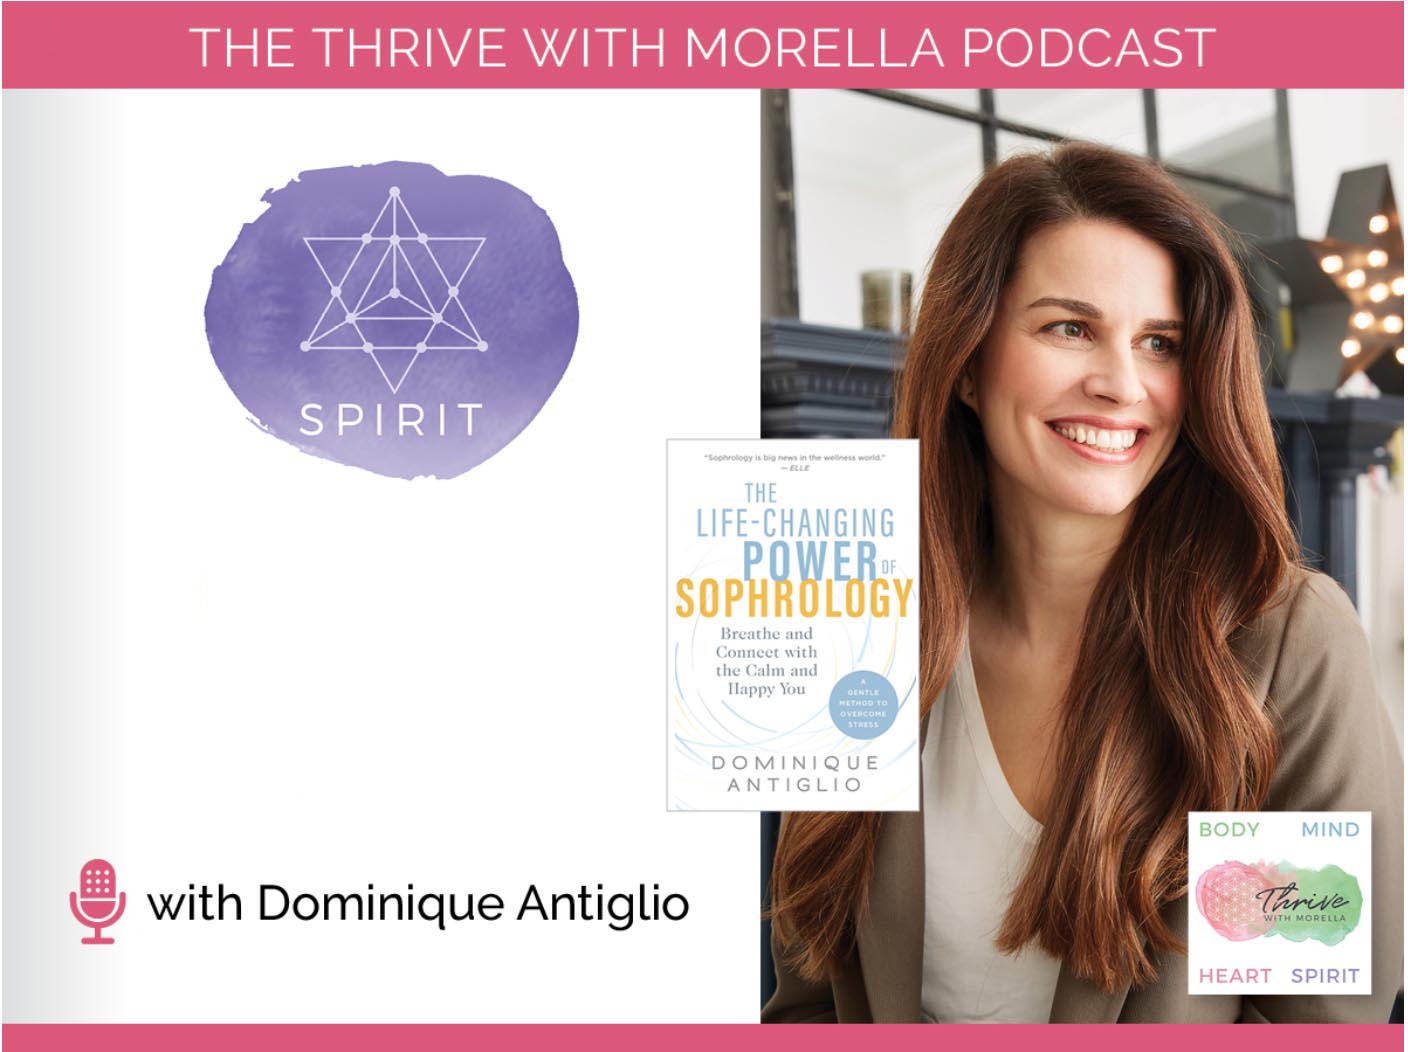 Thrive with Morella: The Life-Changing Power of Sophrology